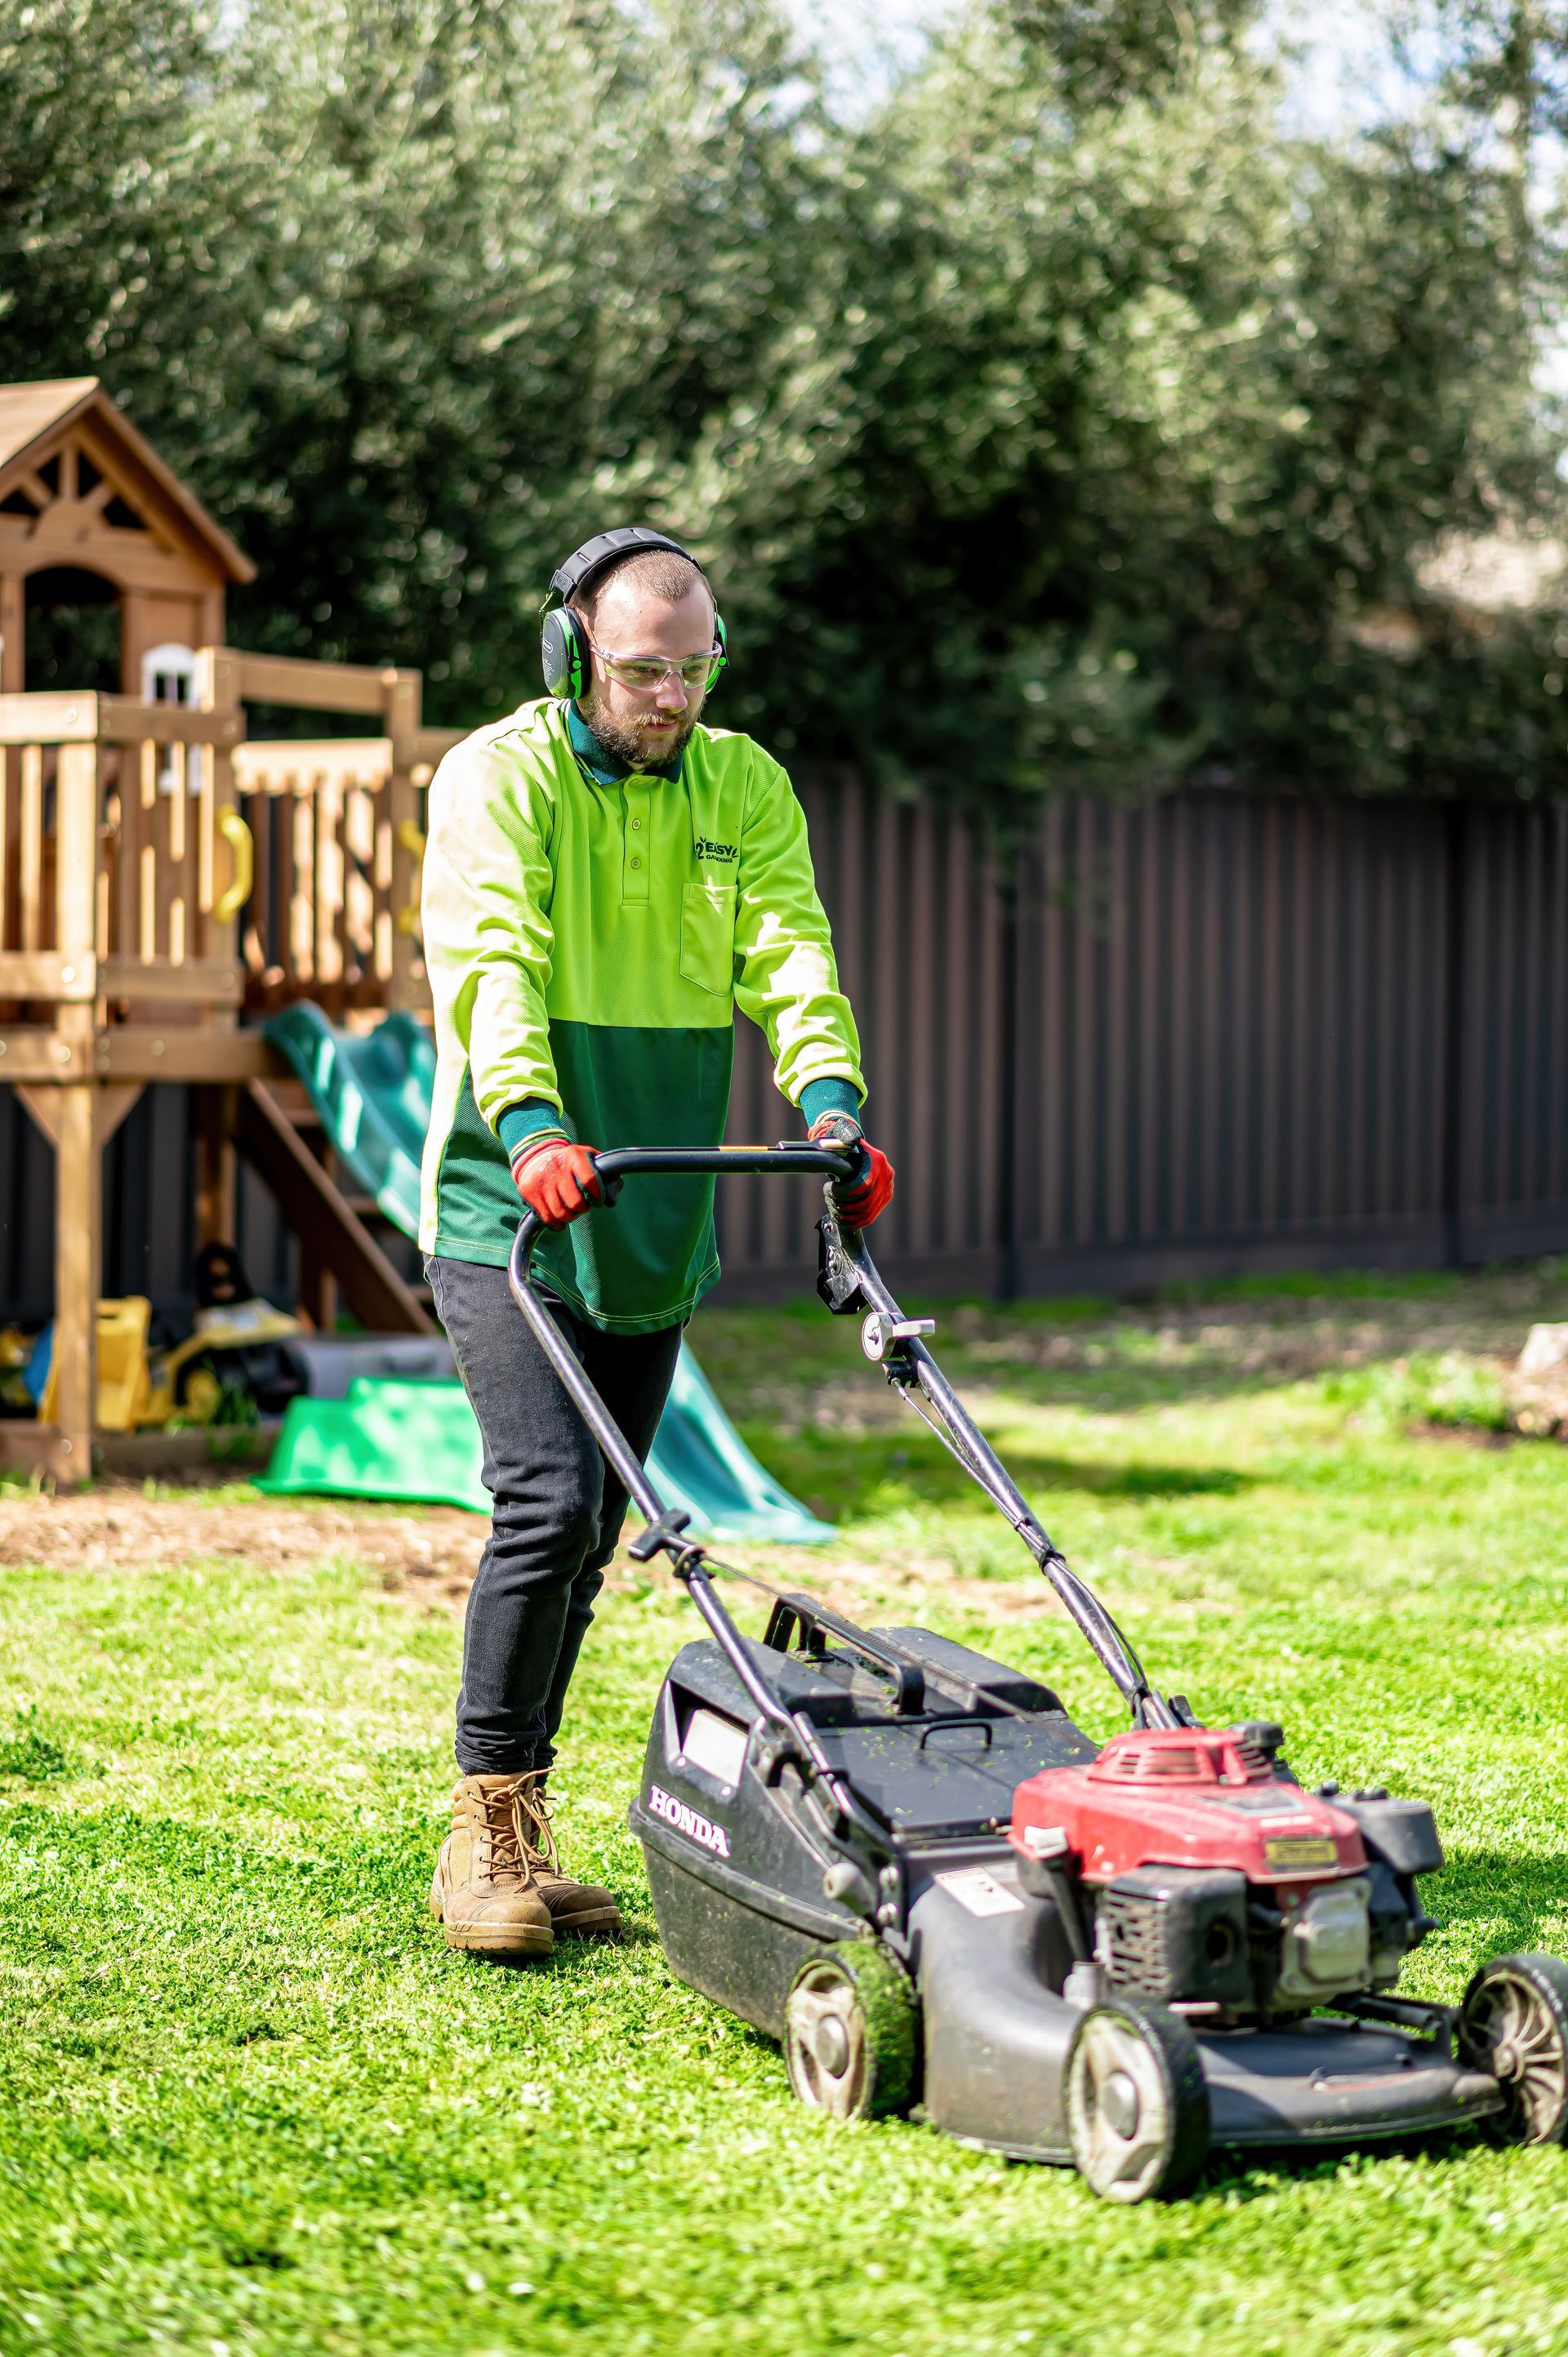 A Man Is Using A Lawn Mower To Cut The Grass In A Backyard — 2easy Cleaning in Bendigo, VIC